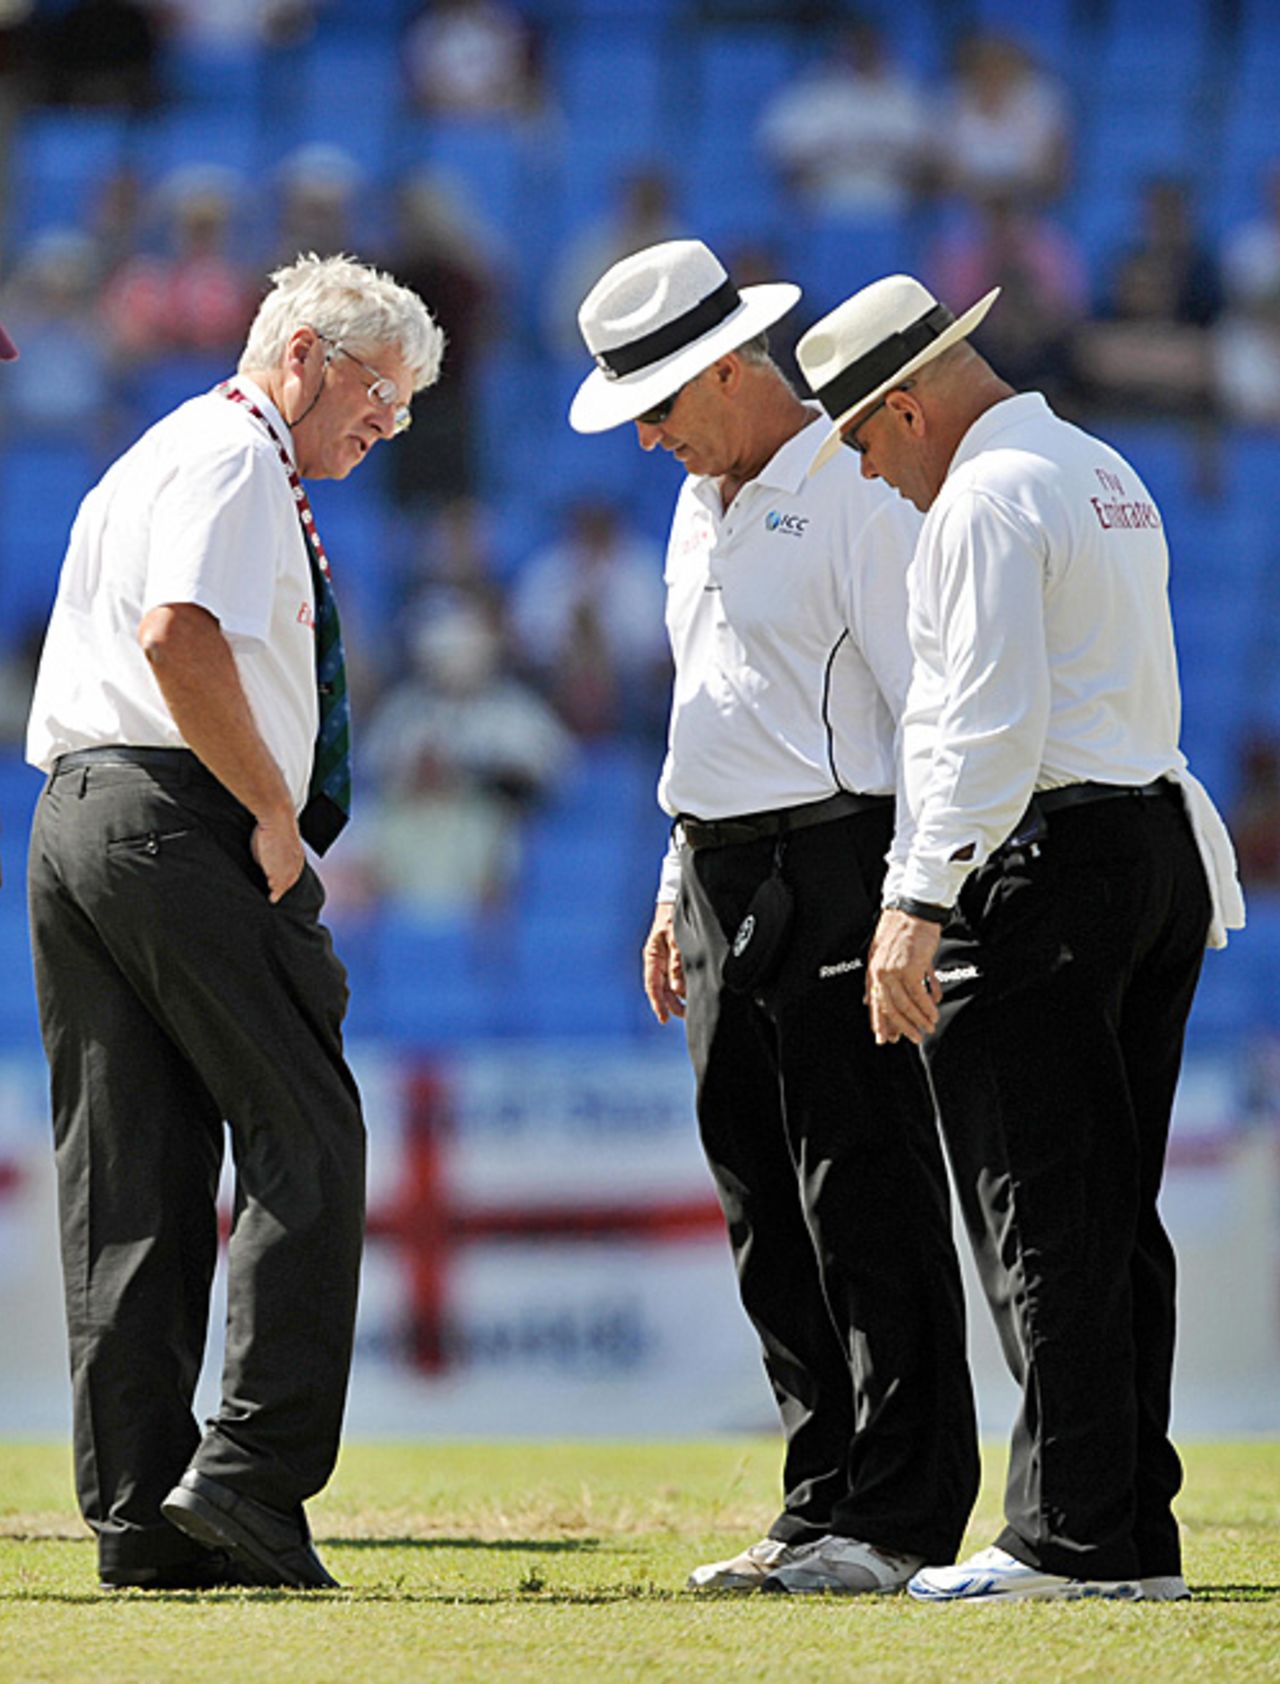 The match referee Alan Hurst inspects the pitch and run-ups with the two umpires, Daryl Harper and Tony Hill, West Indies v England, 2nd Test, St. Johns, Antigua, February 13, 2009